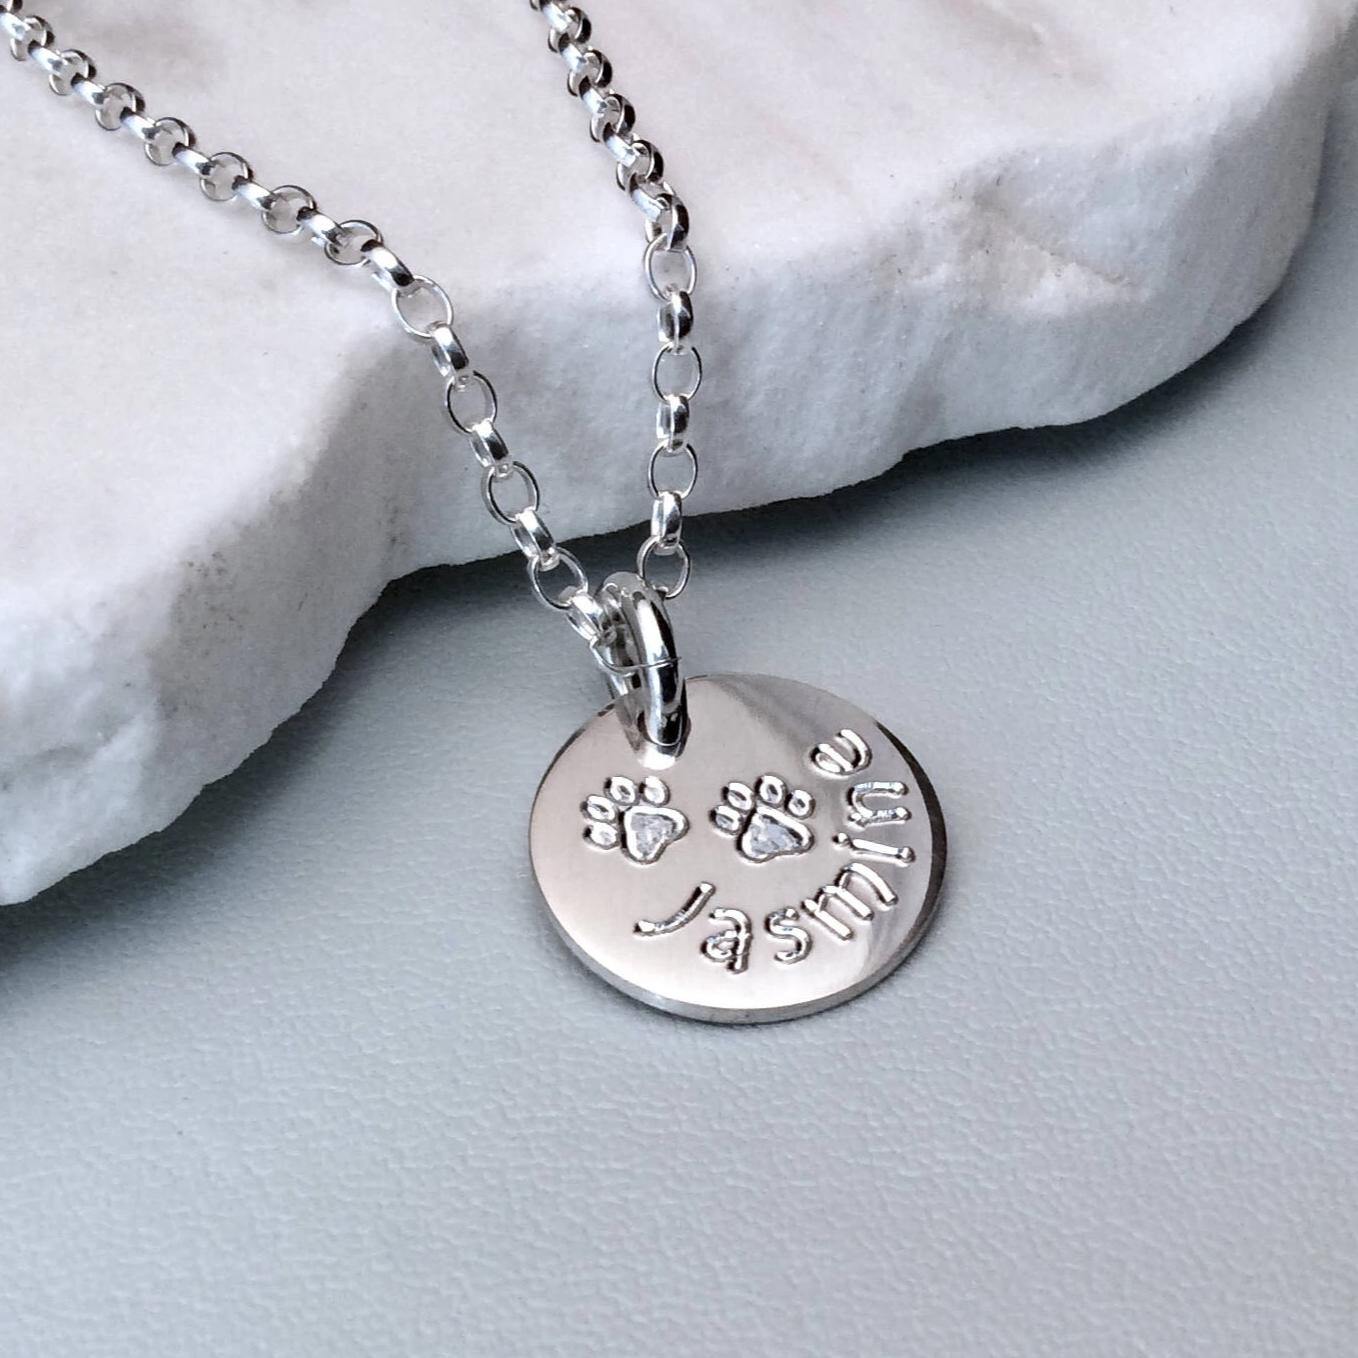 Paw print necklace personalised in sterling silver, 12mm - Tracy Anne Jewellery